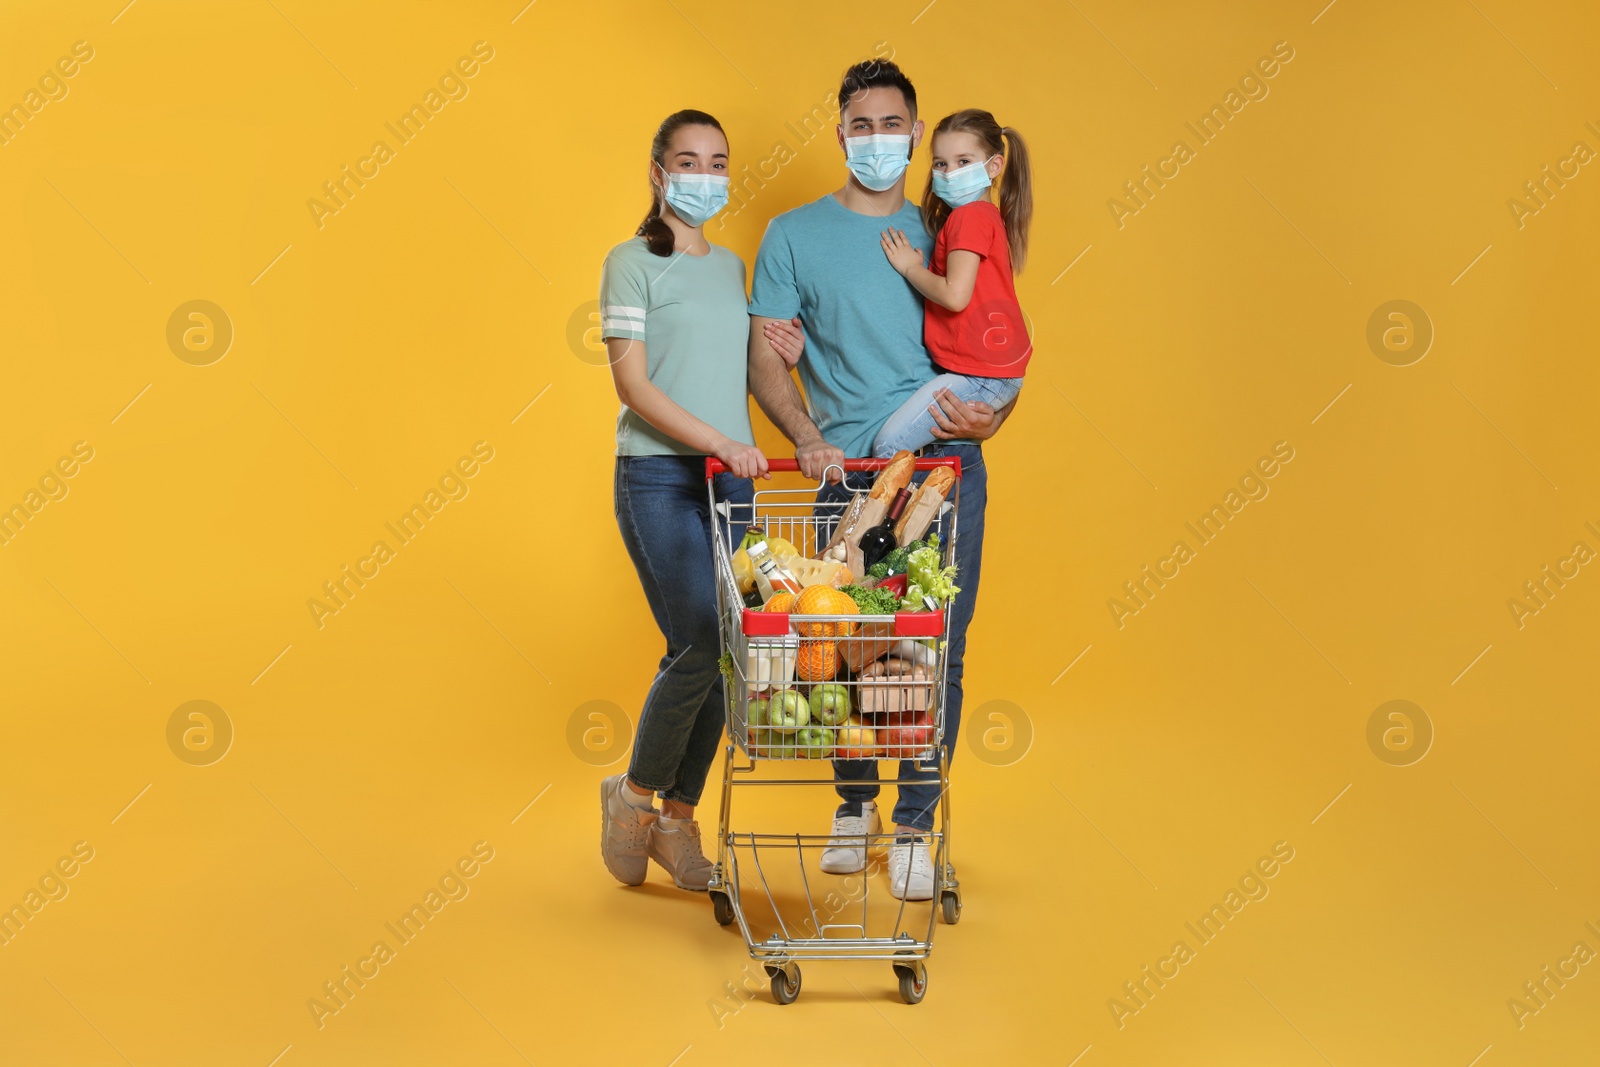 Photo of Family with protective masks and shopping cart full of groceries on yellow background